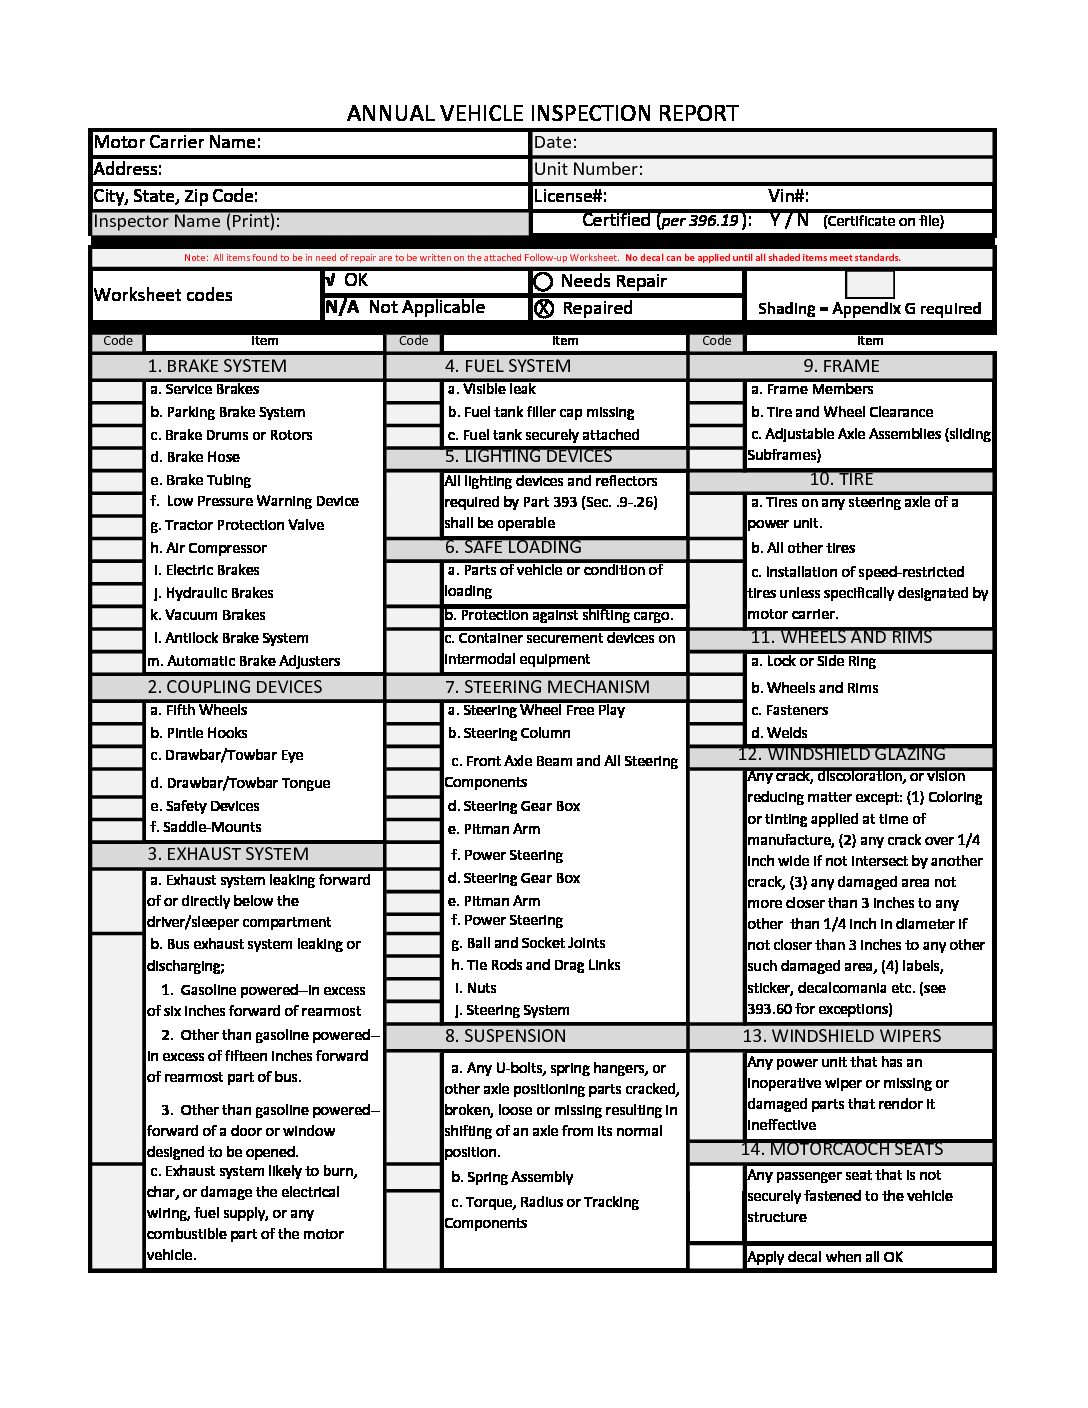 Free Printable Commercial Vehicle Inspection Forms - Infoupdate.org